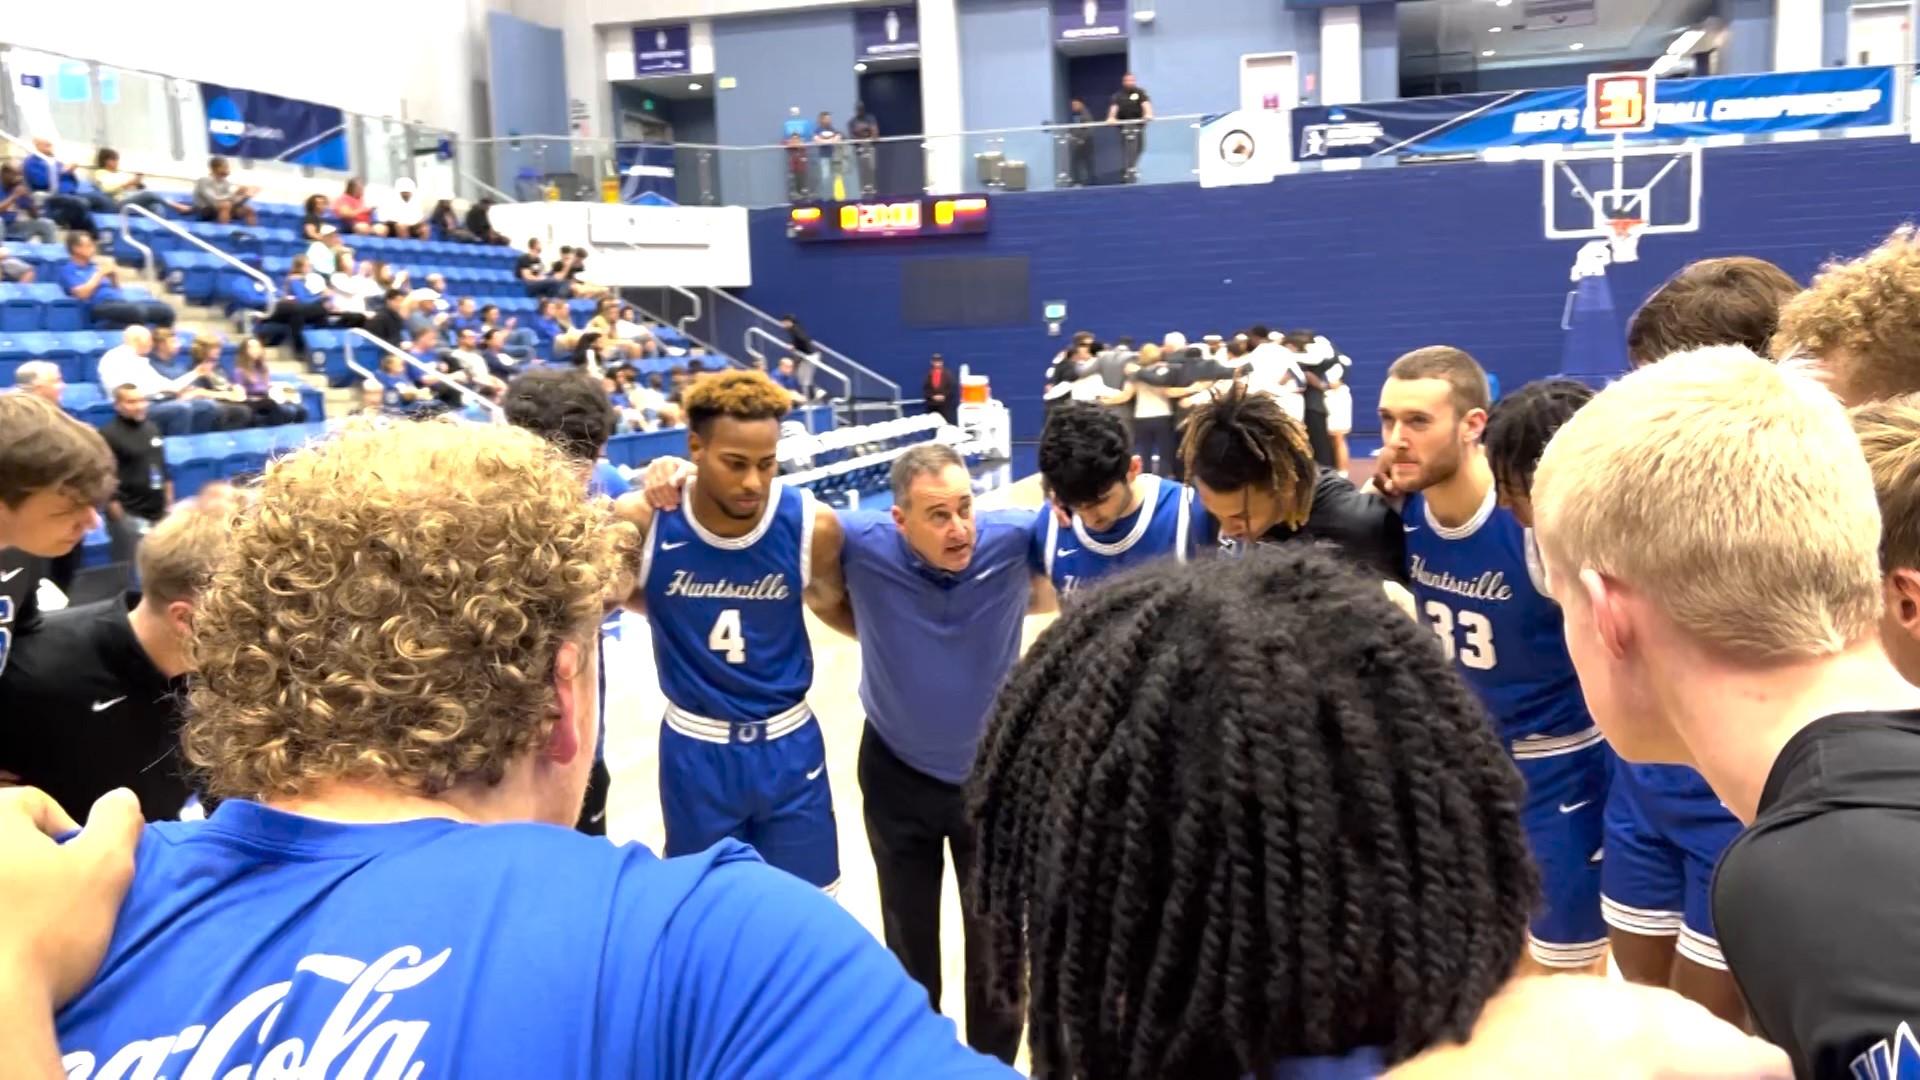 The UAH men's basketball team saw its magical March run come to a close on Sunday as the seventh-seeded Chargers fell 82-67 to No. 3 seed Embry-Riddle